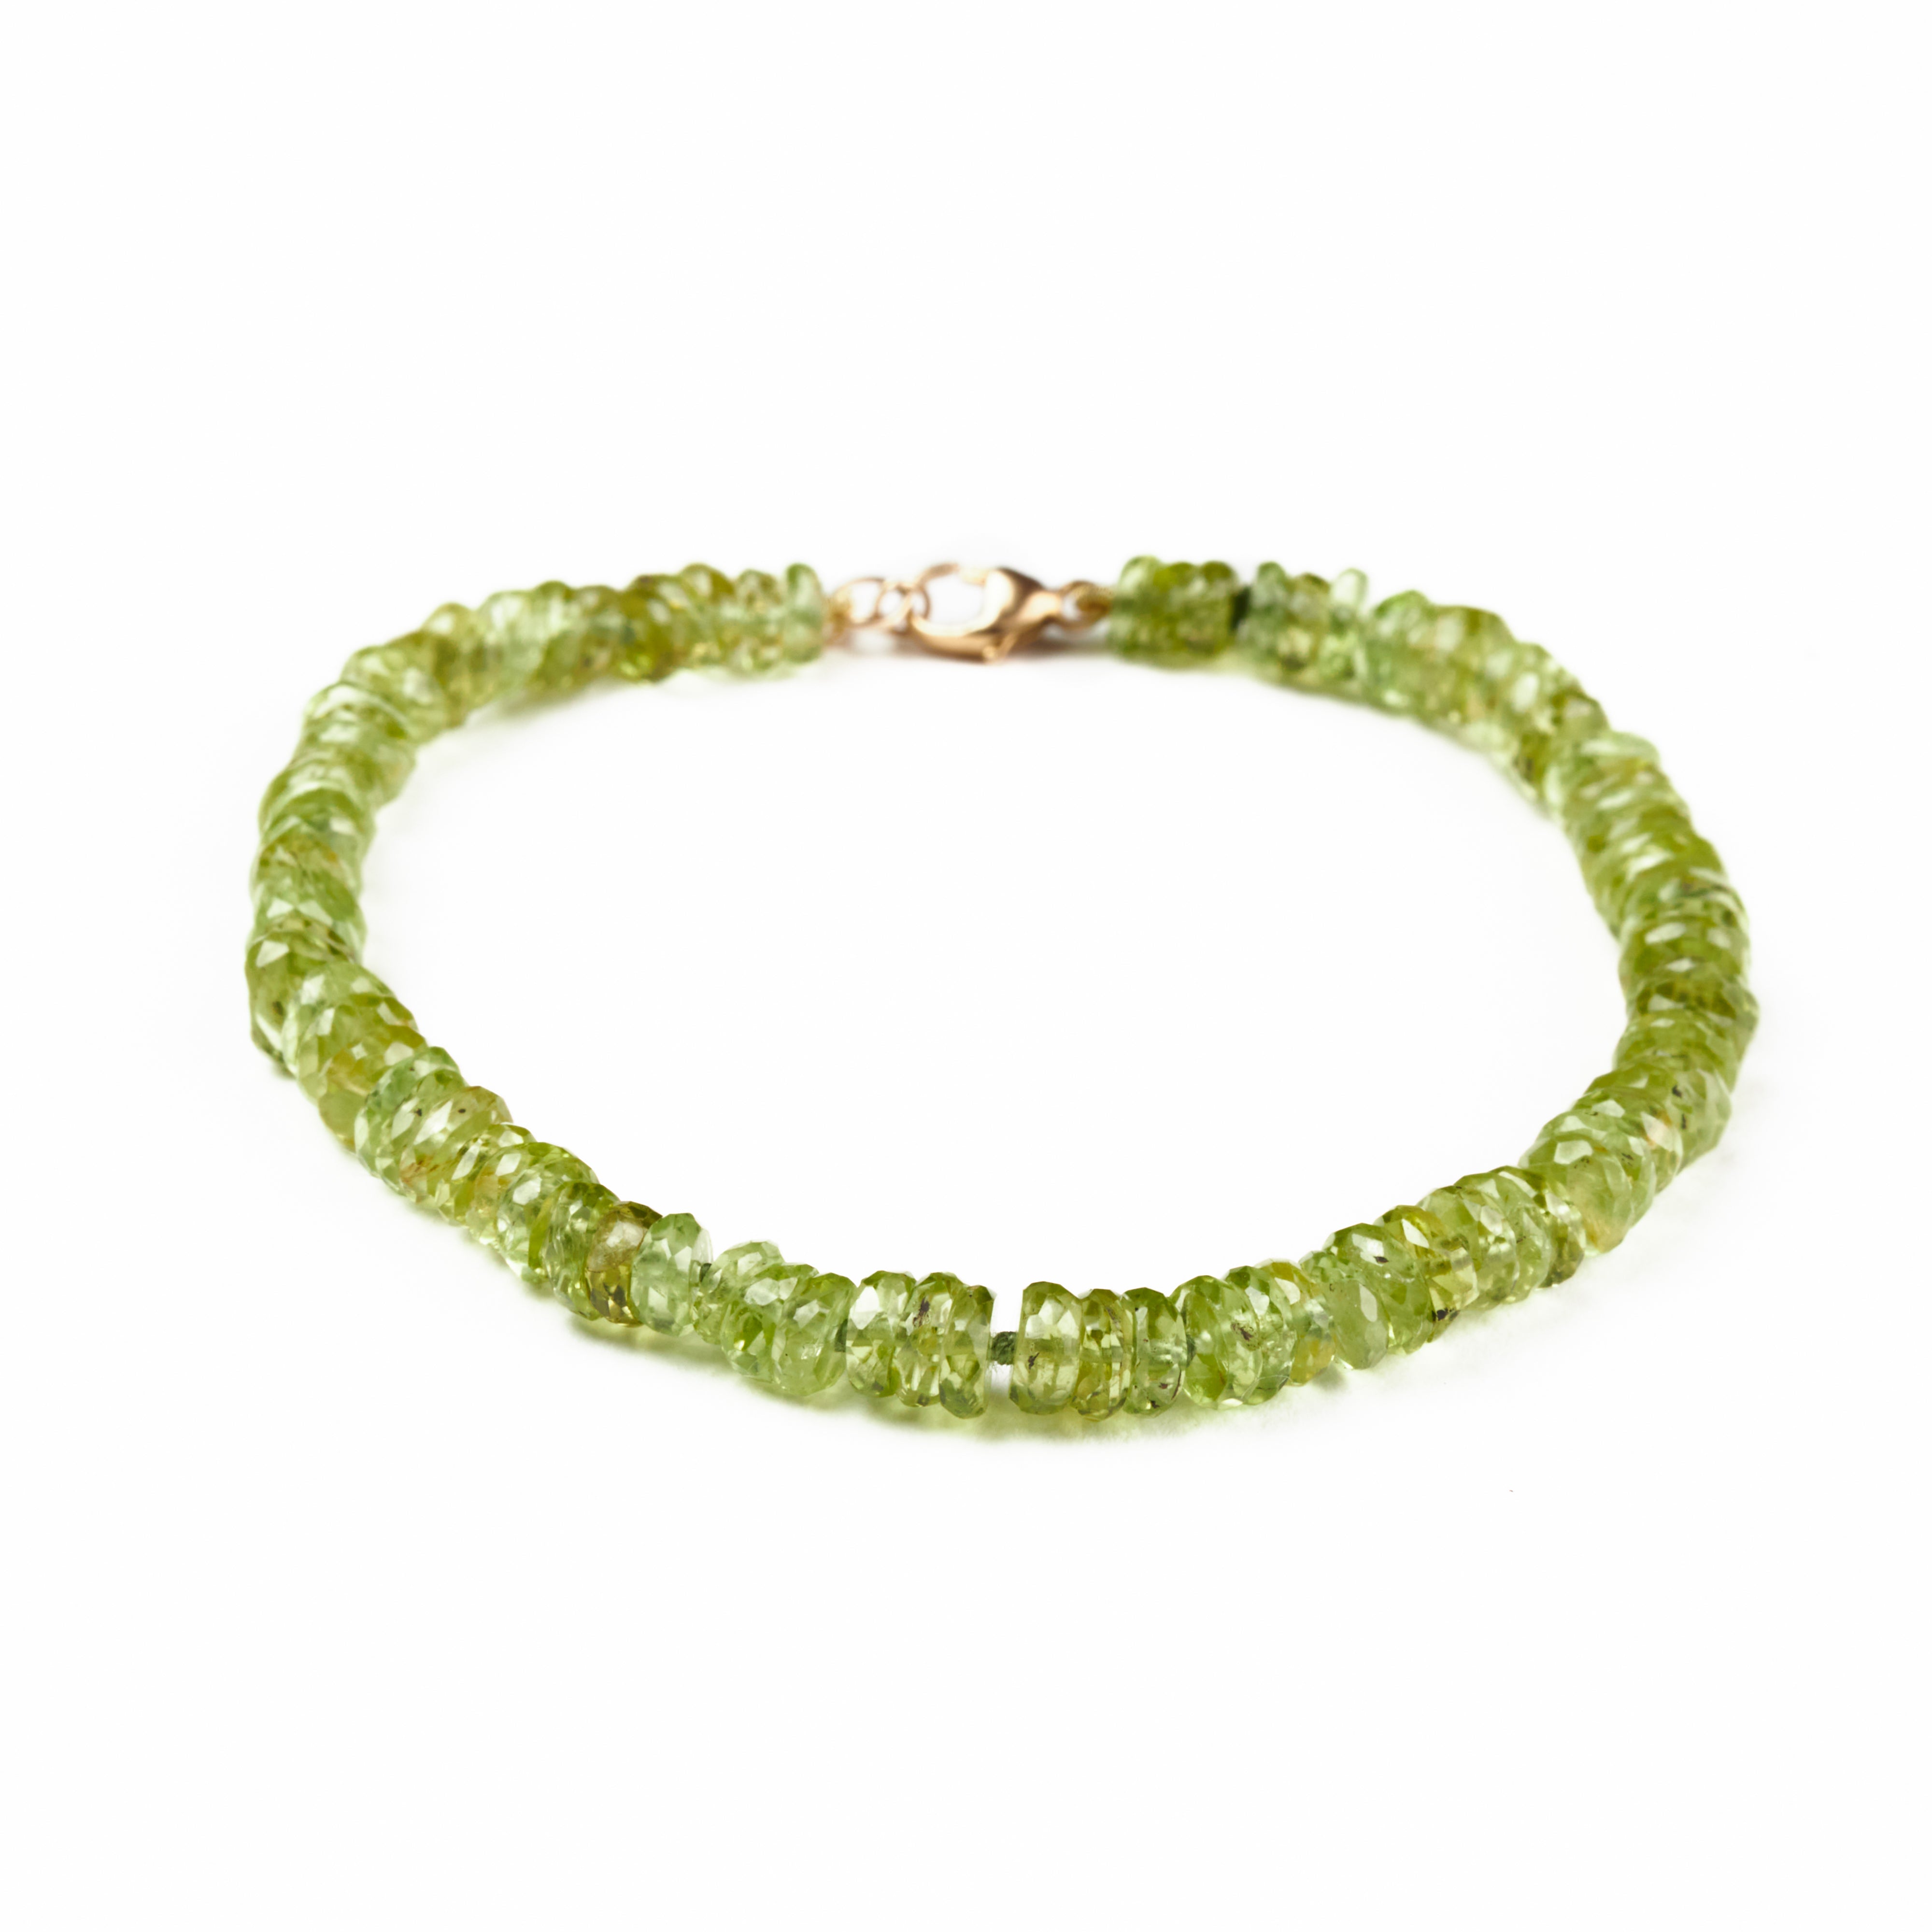 Natural peridot and rock crystal stone bracelet, sterling silver, 14K gold  filled, gemstones, August birthstone